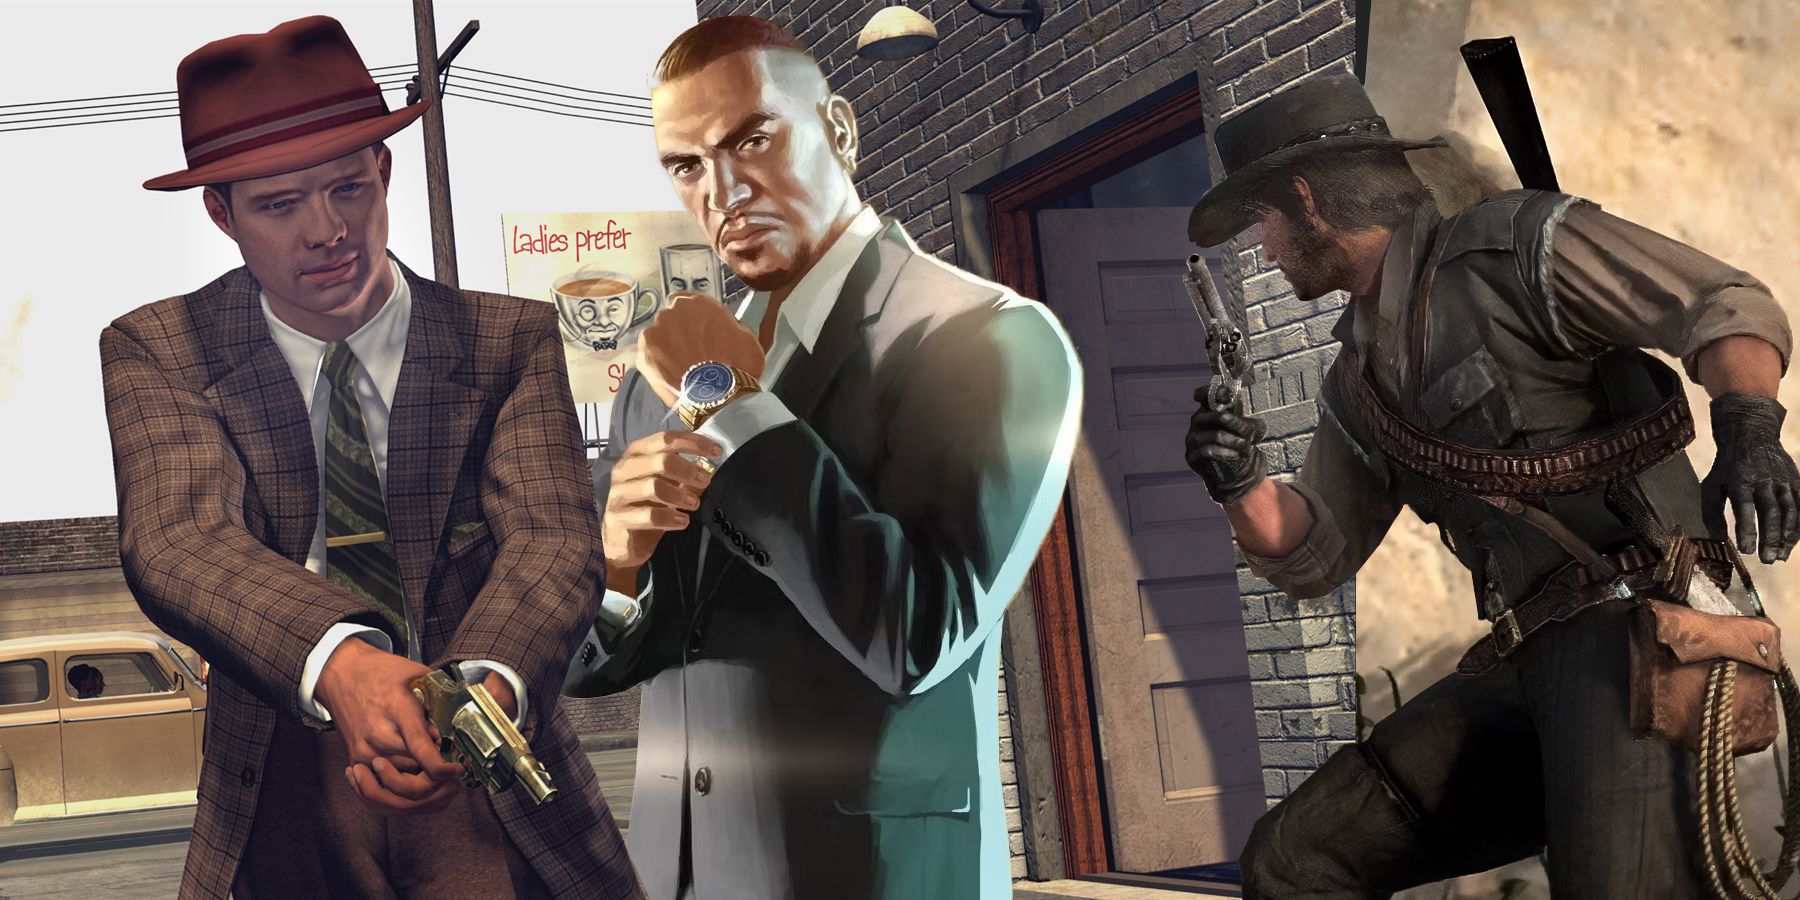 20 Years Ago, Rockstar Games Made a Brilliant Detective Shooter